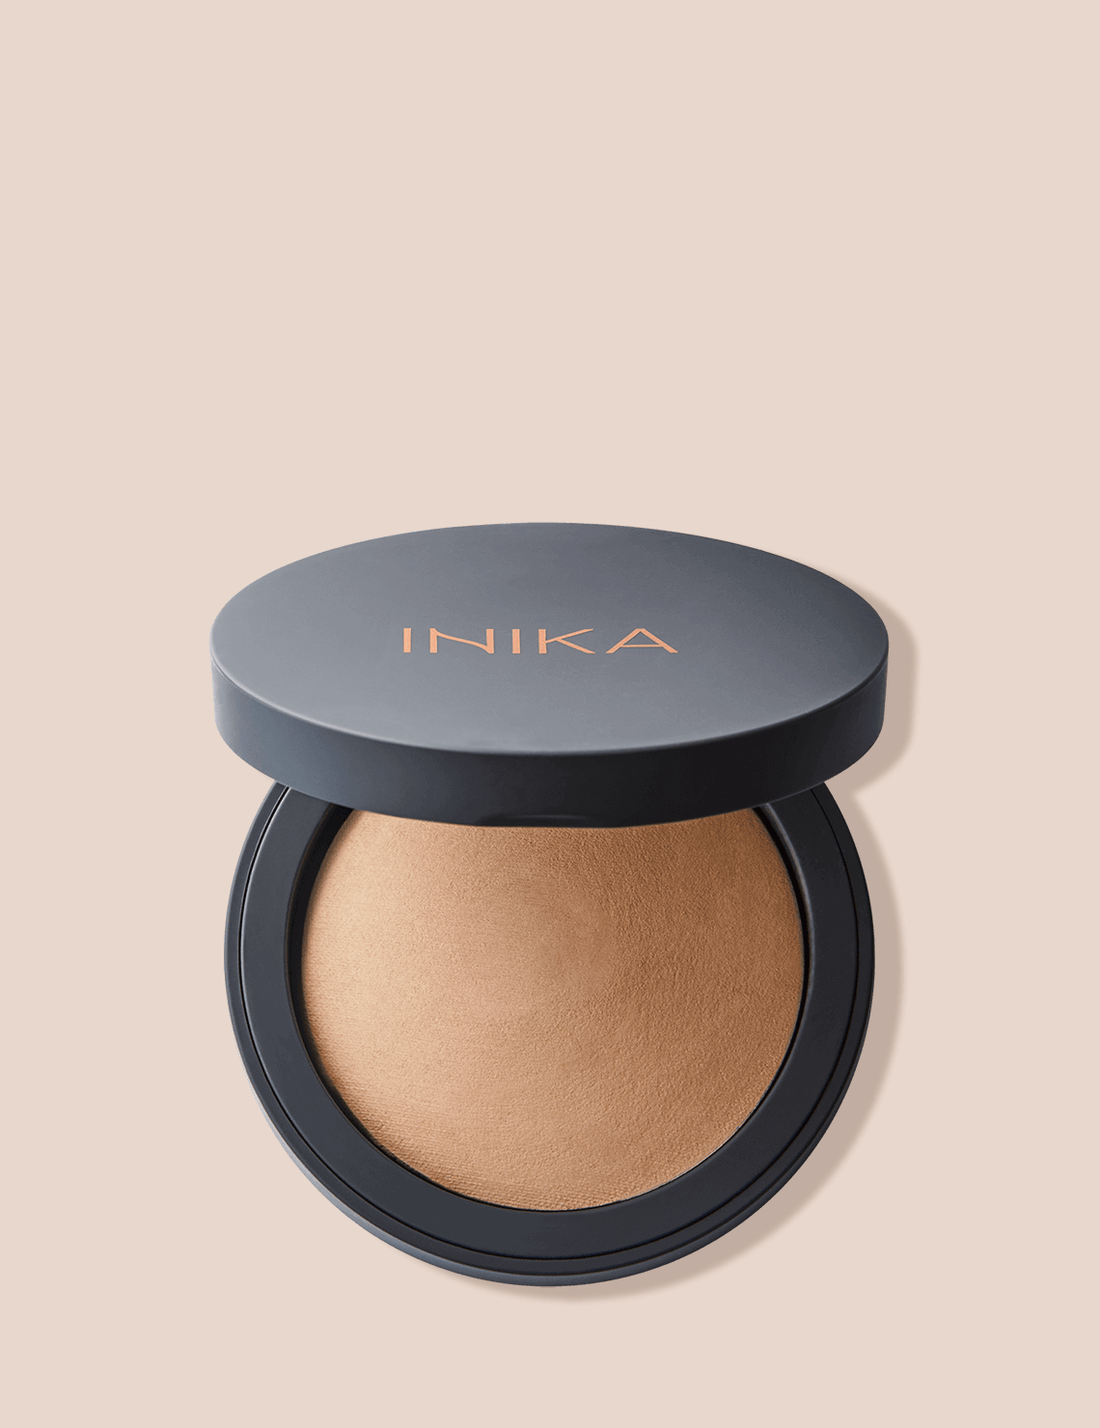 Baked Mineral Foundation - Trust (Retail)